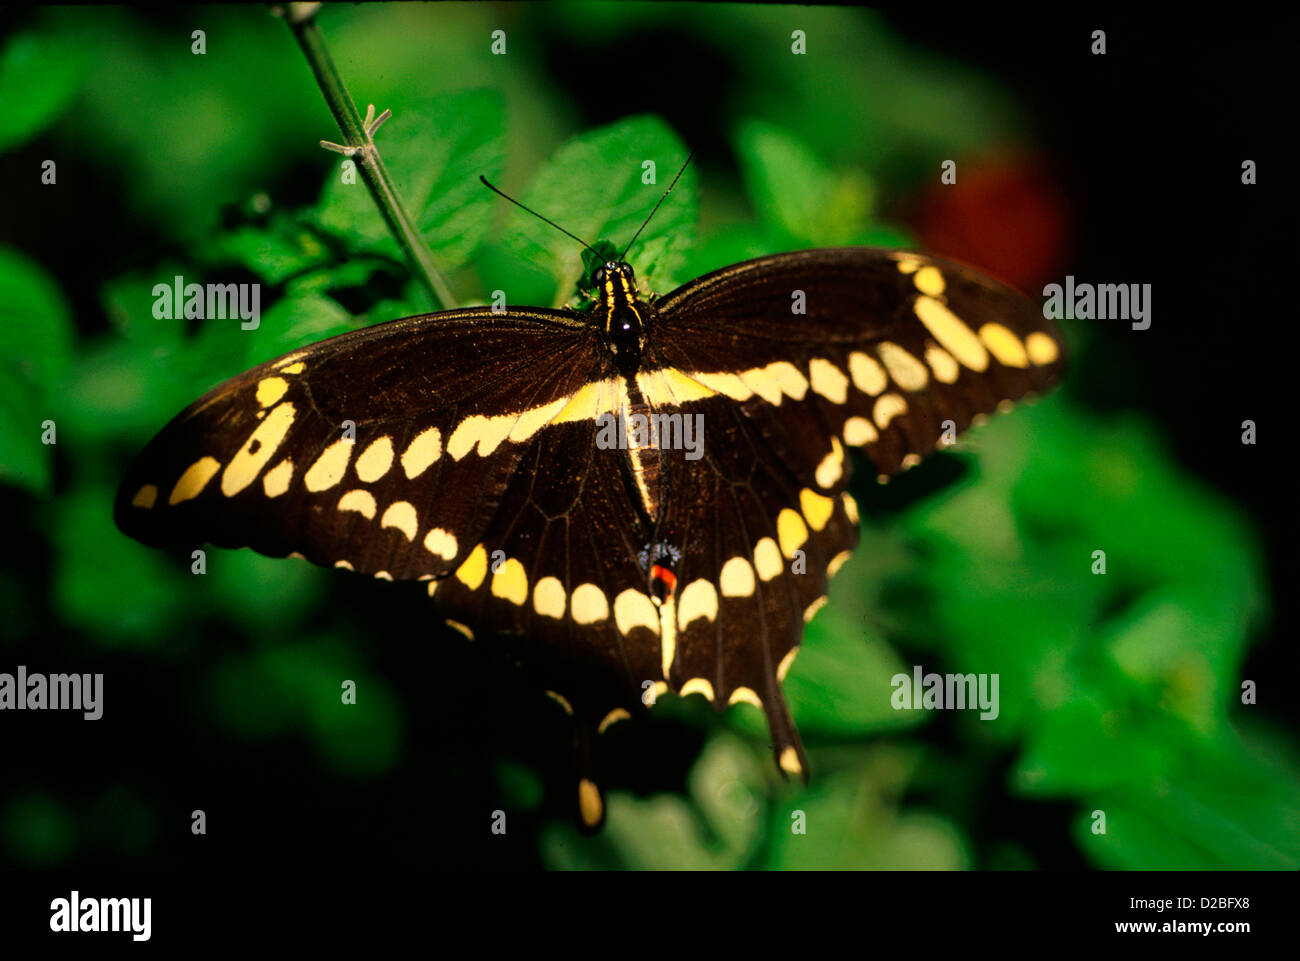 Giant Swallowtail Butterfly On Some Leaves Stock Photo